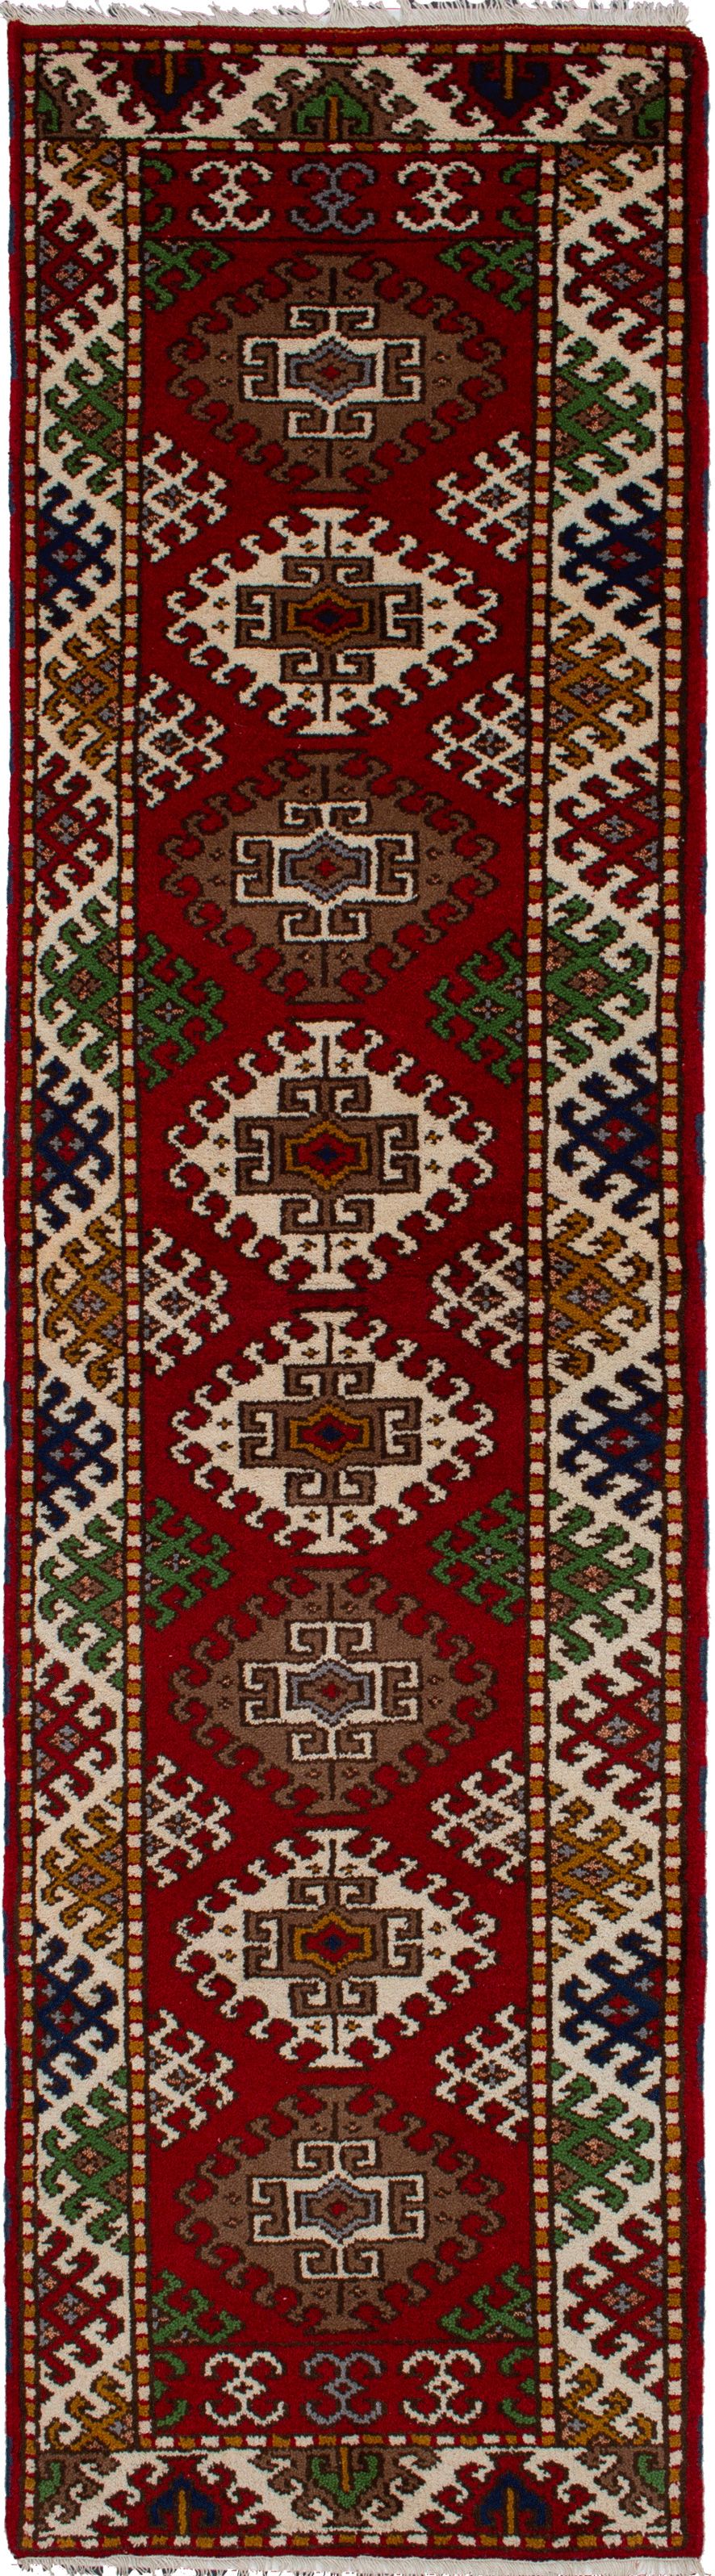 Hand-knotted Royal Kazak Red Wool Rug 2'8" x 9'10"  Size: 2'8" x 9'10"  